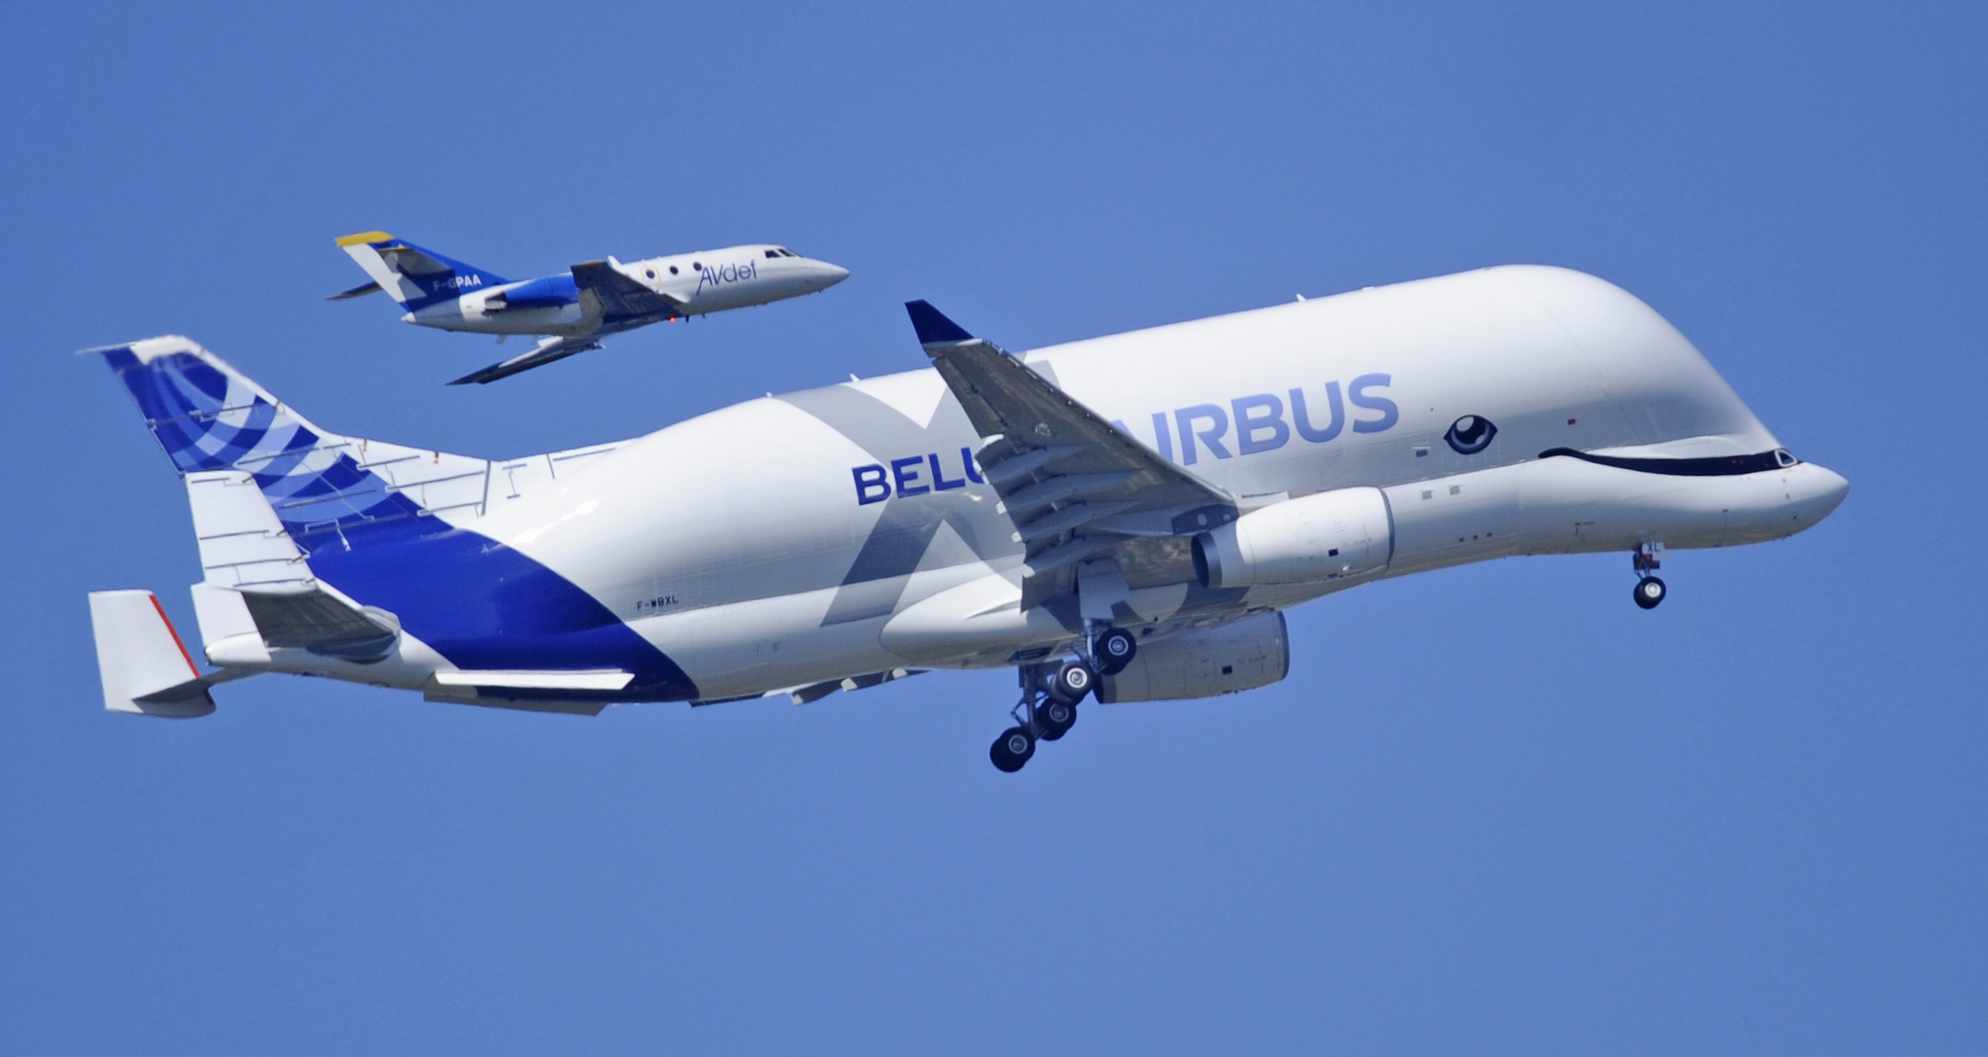 Airbus A330-700 Beluga XL, over Toulouse-Blagnac Airport in France, July 19, 2018